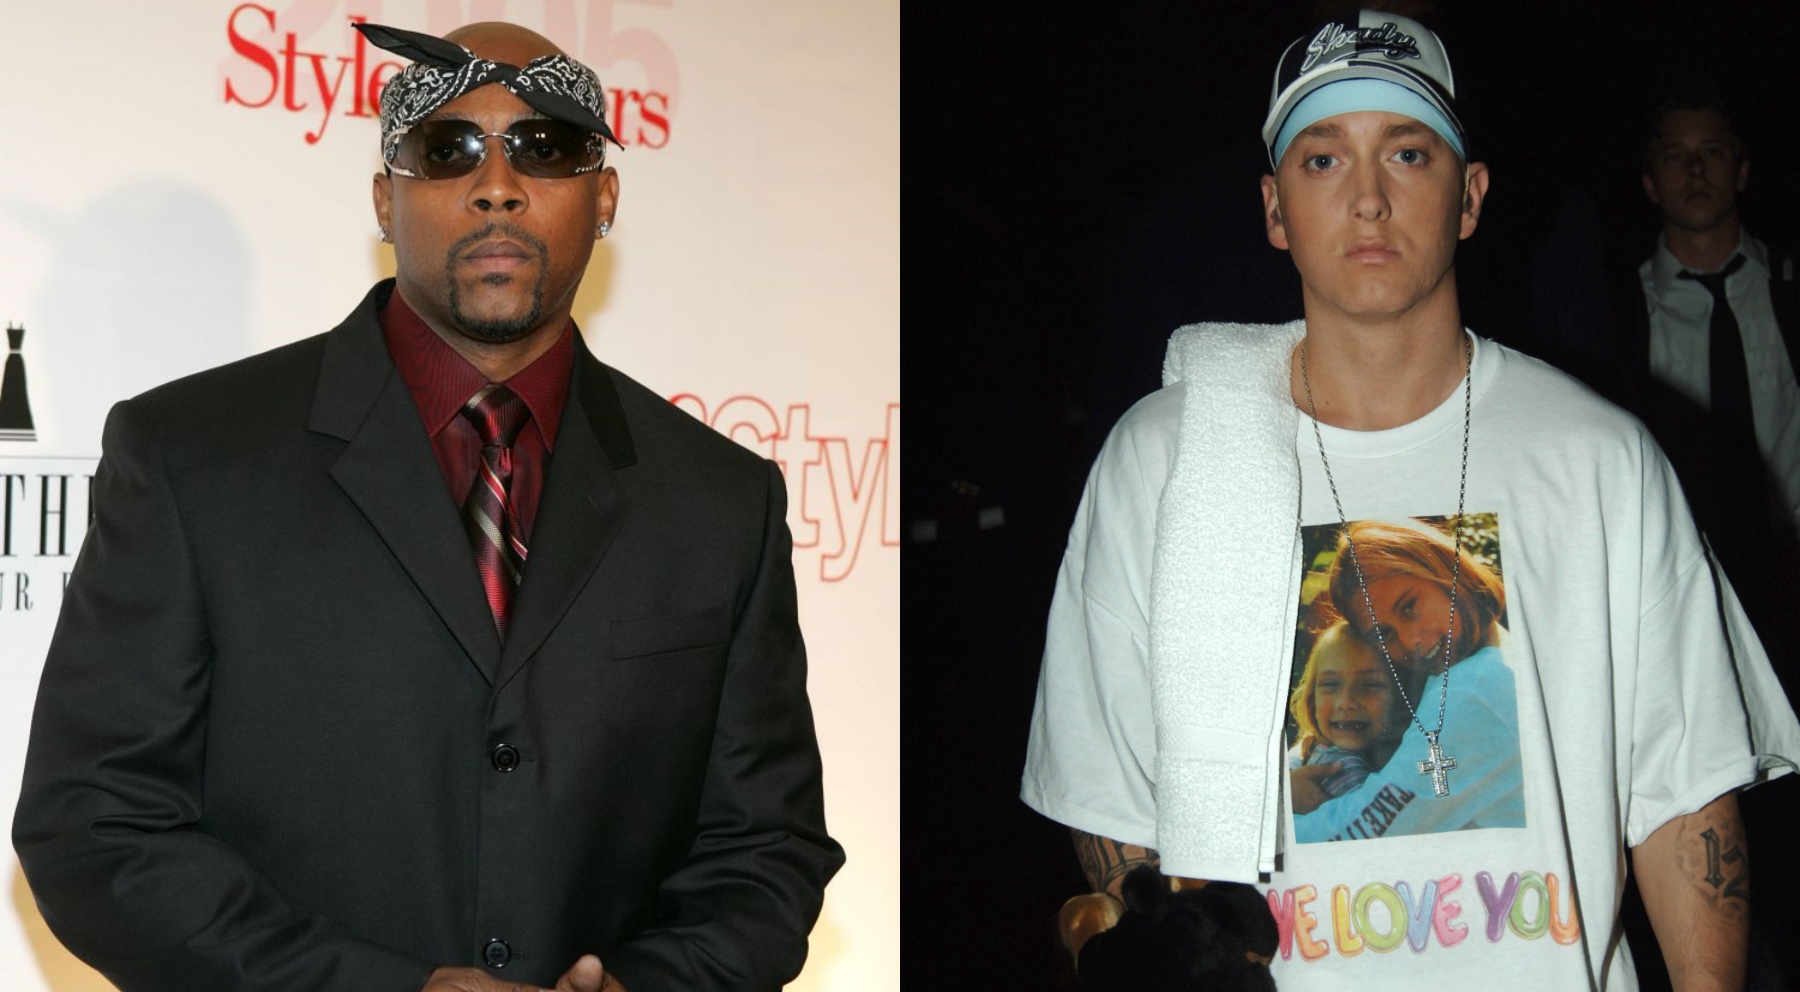 Till I Collapse By Eminem & Nate Dogg Sets A New Spotify Streaming Record